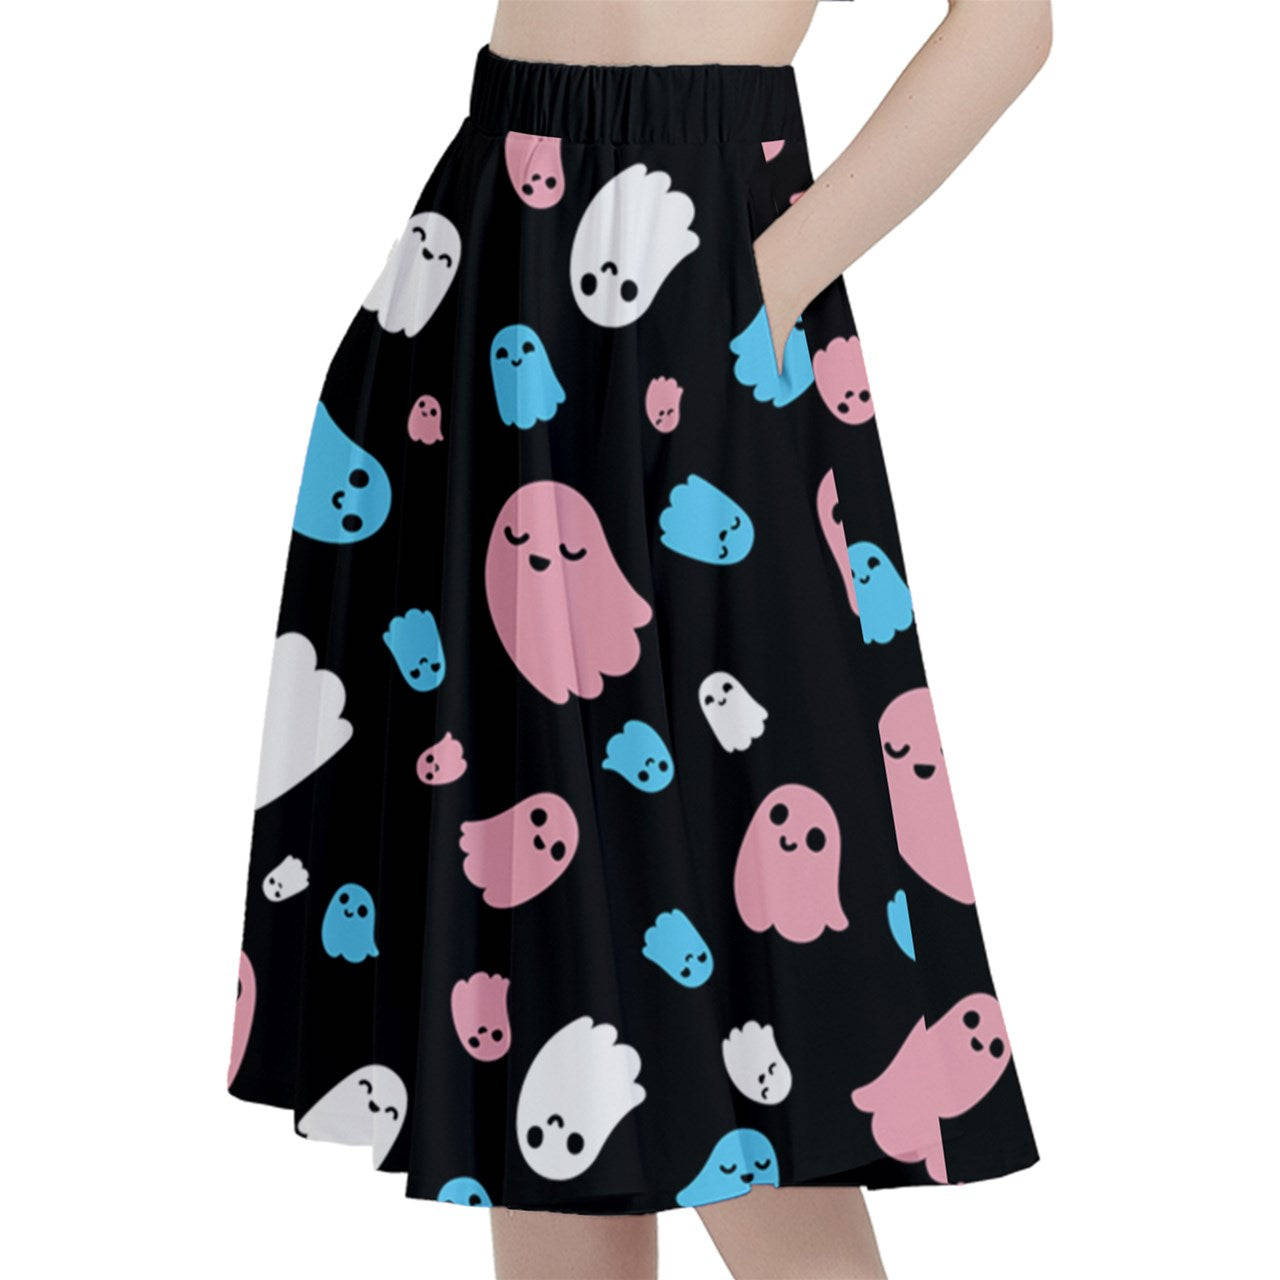 Pixicat - — Skater Skirt Available for Female YA/A and Teens ...